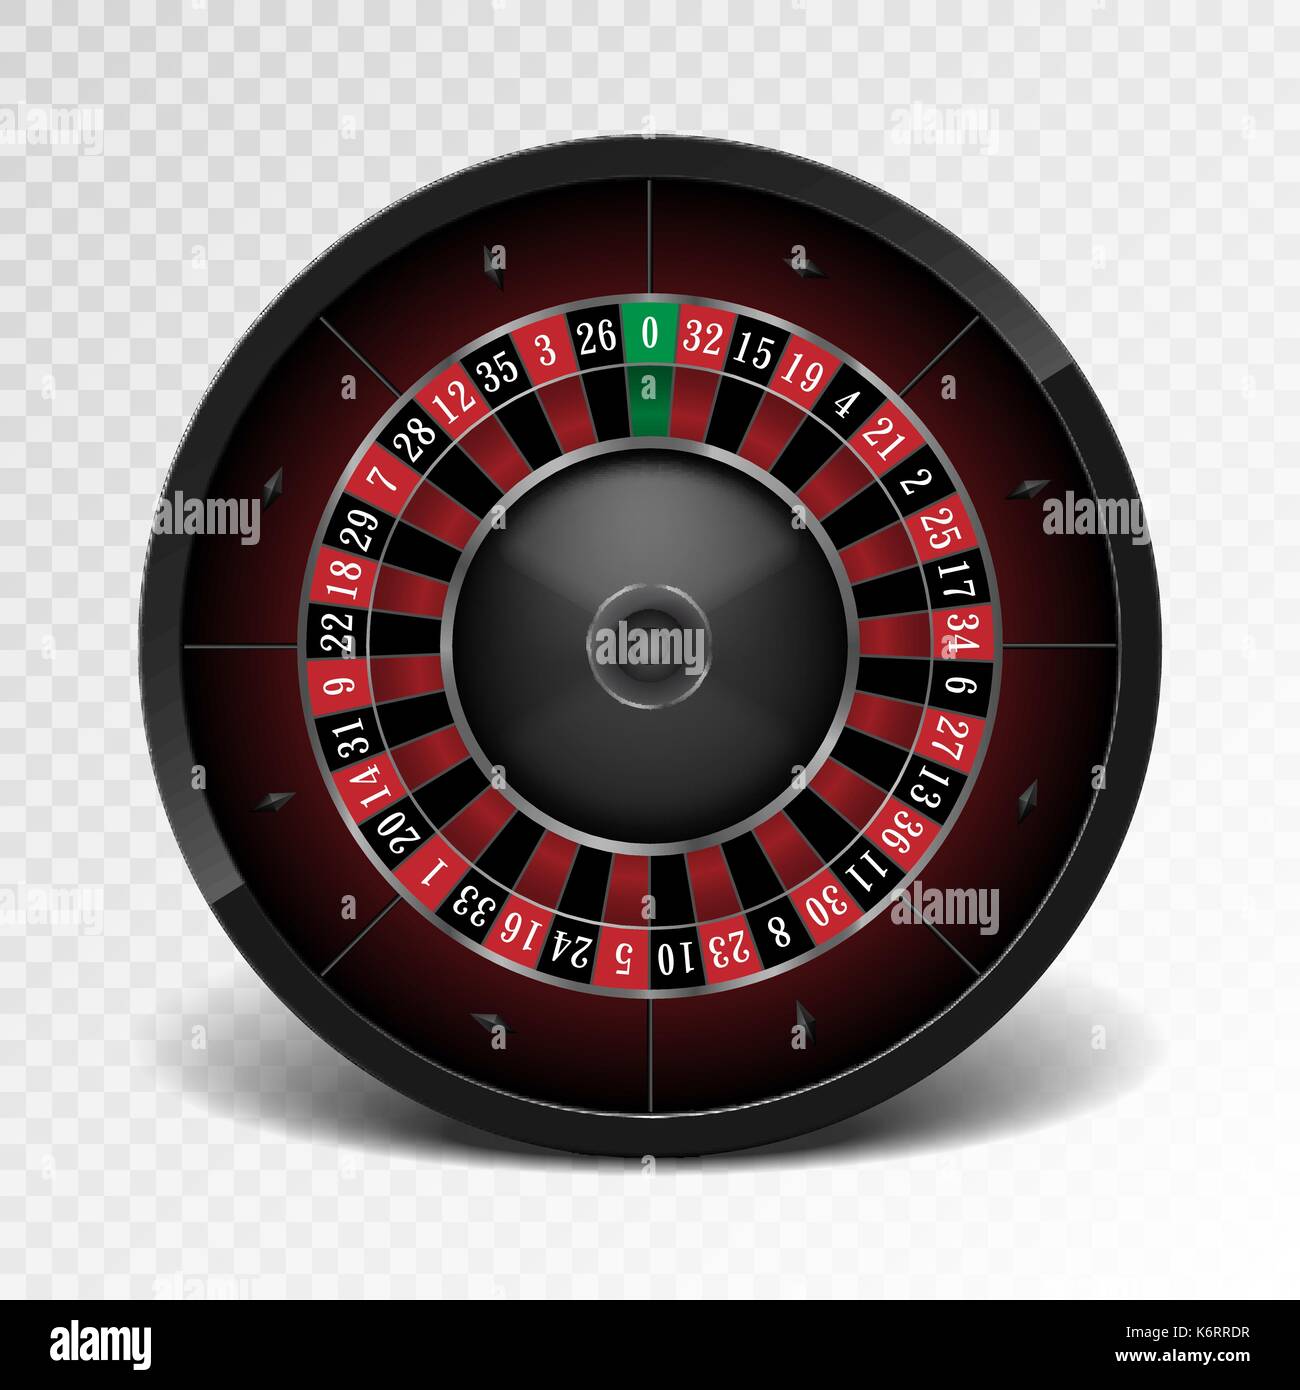 Realistic black casino roulette wheel isolated on transparent background. American gambling roulette wheel. Vector illustration. Stock Vector